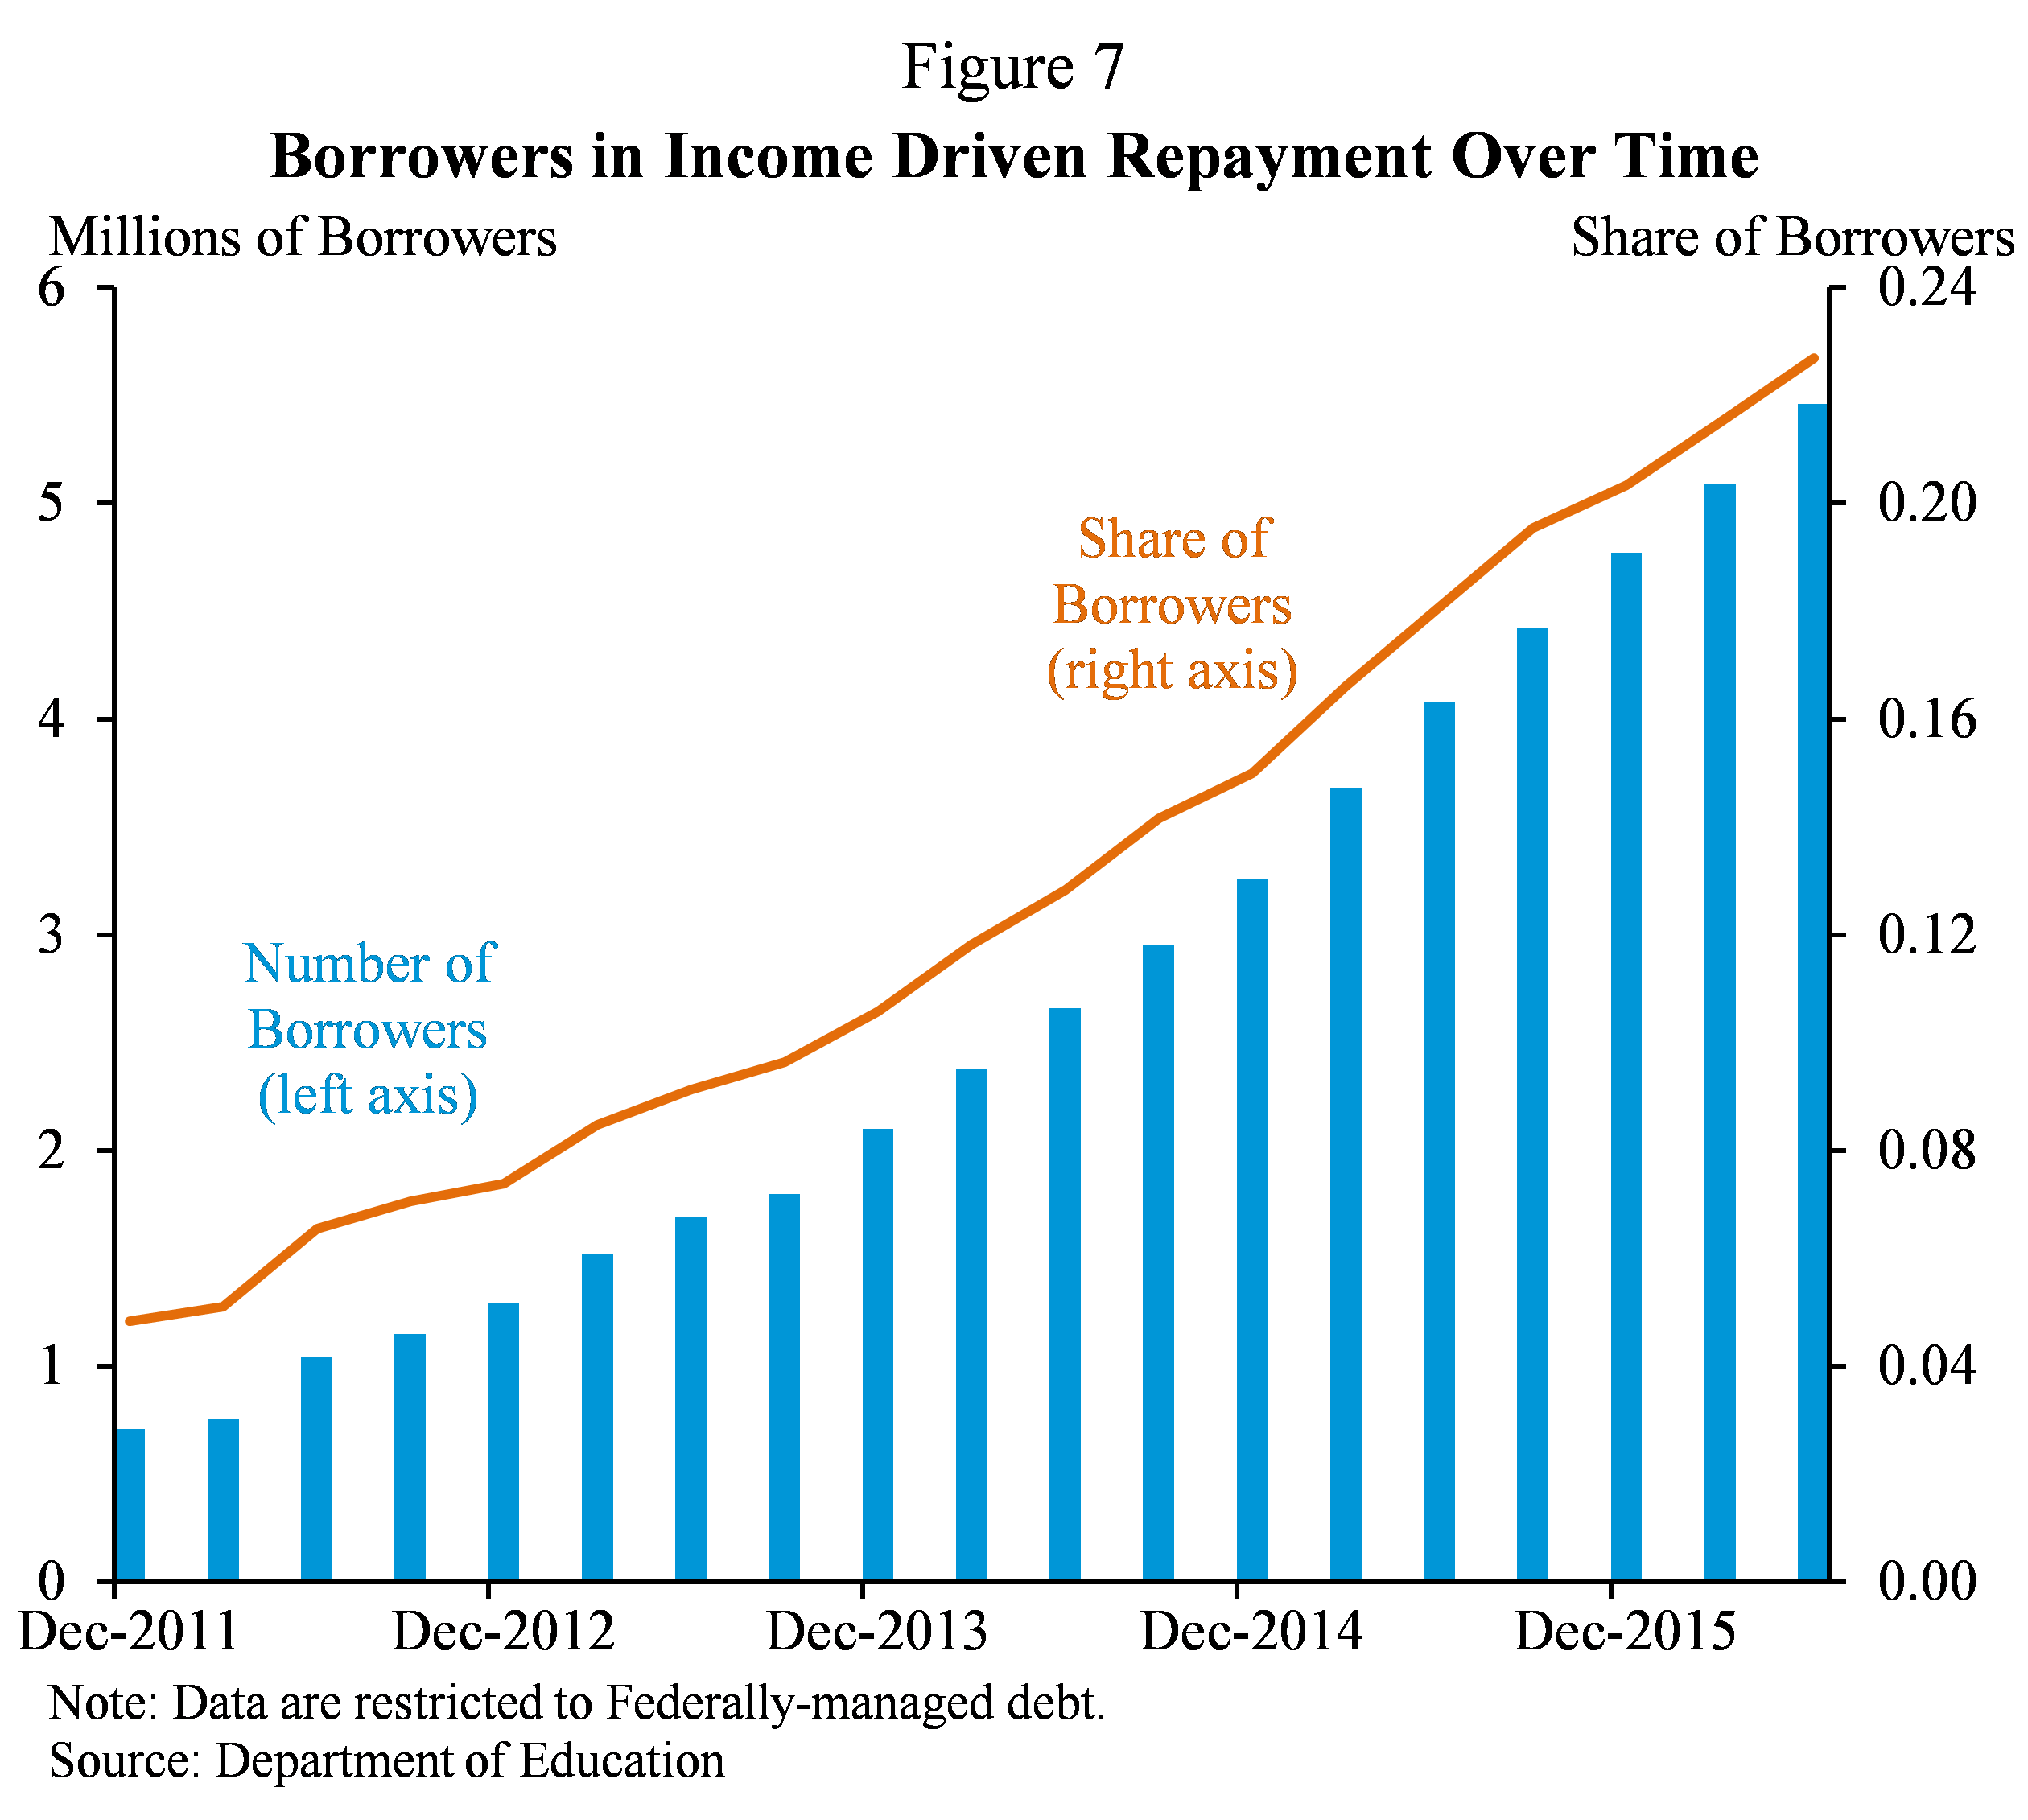 Figure 7. Borrowers in Income Driven Repayment Over Time